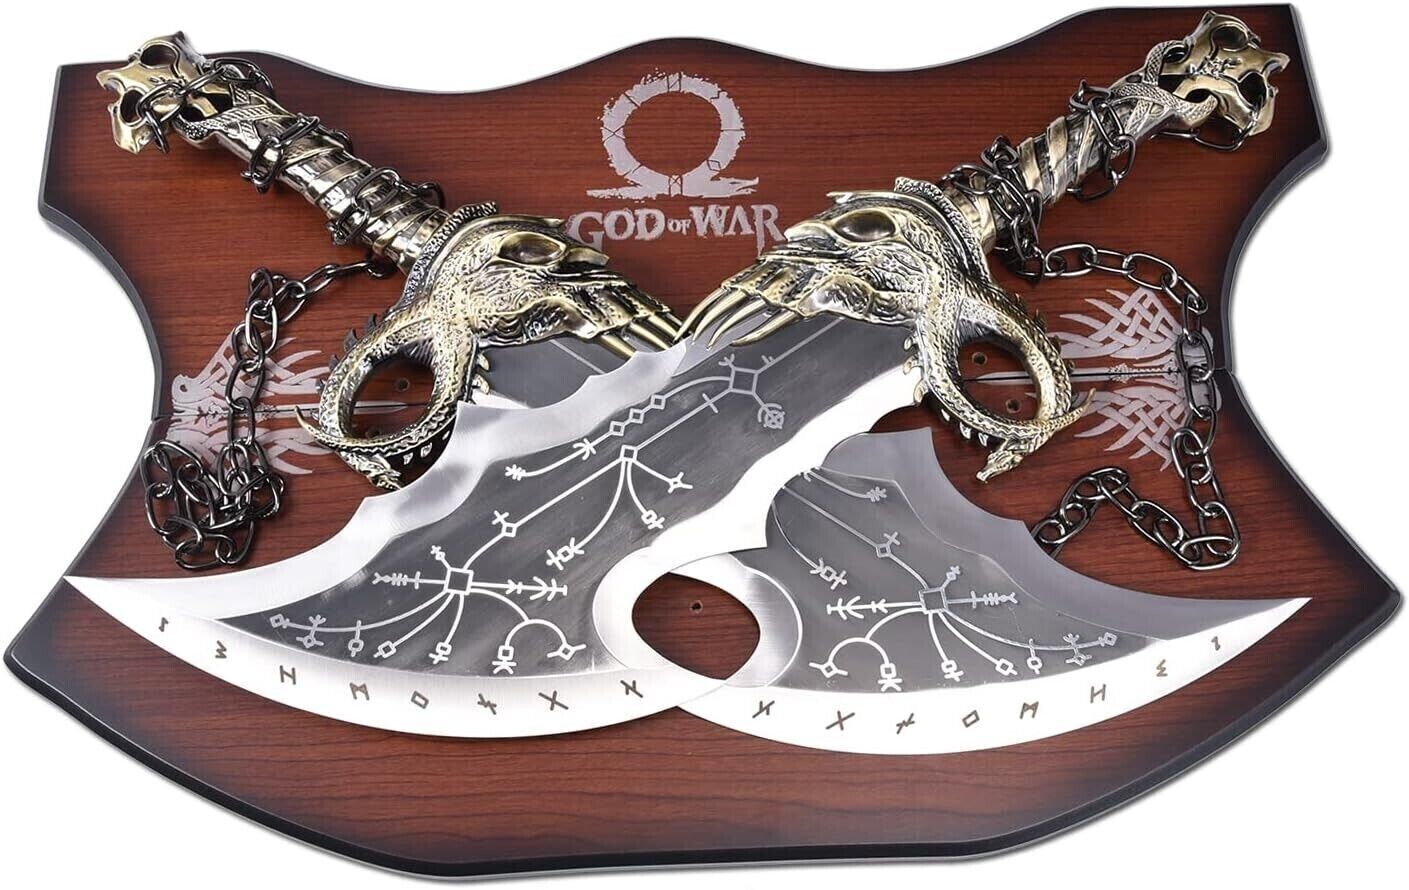 Kratos Blades of chaos God of War twin blades with chain golden edition for gift